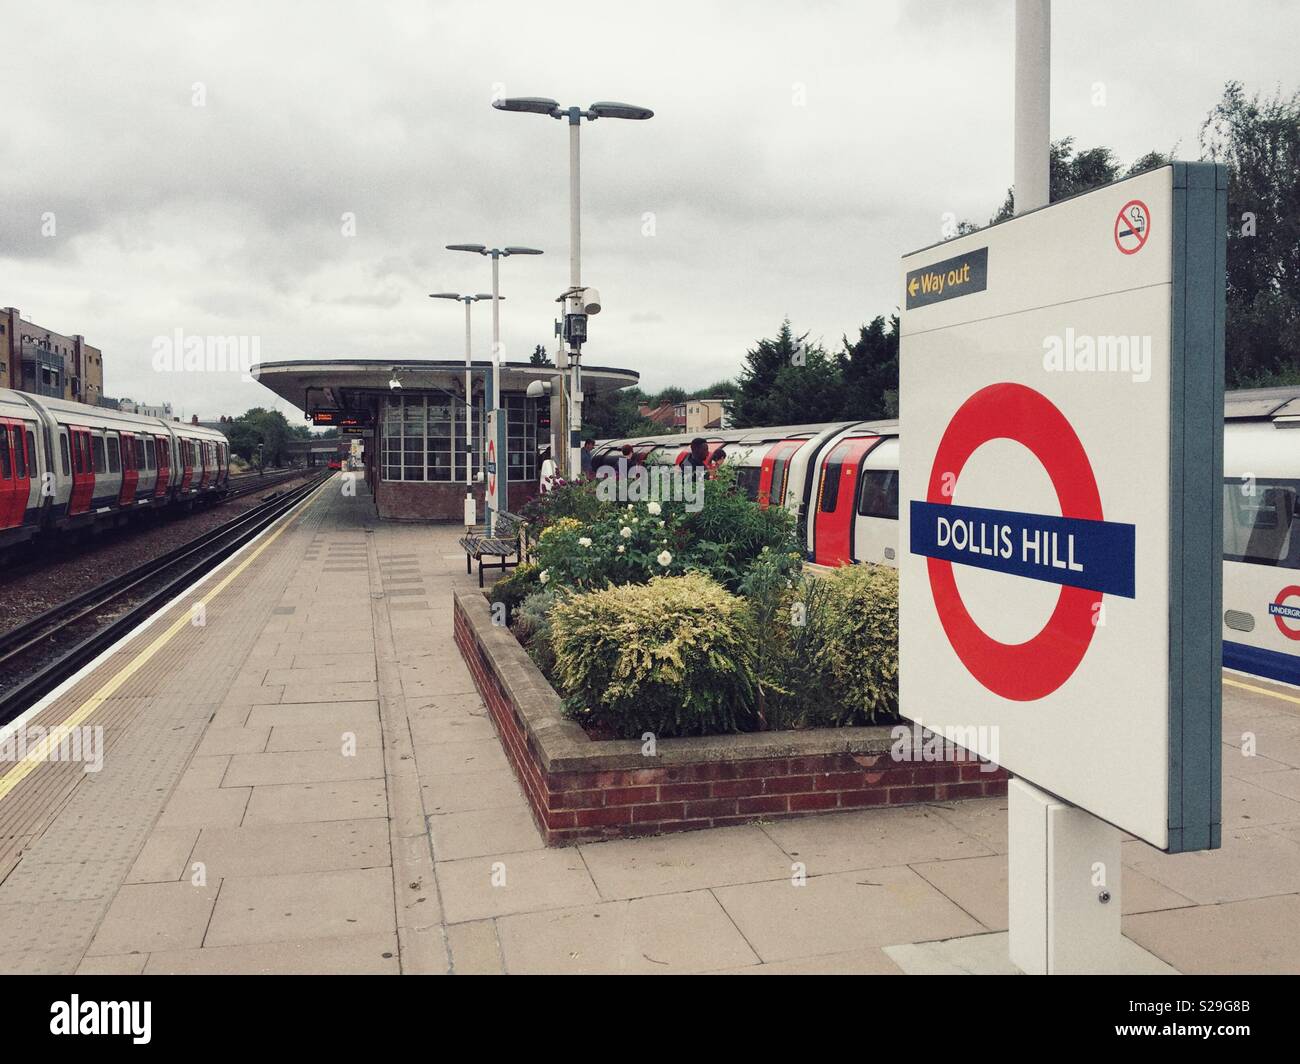 Tube trains at Dollis Hill station, North West London, UK, England, Great Britain Stock Photo